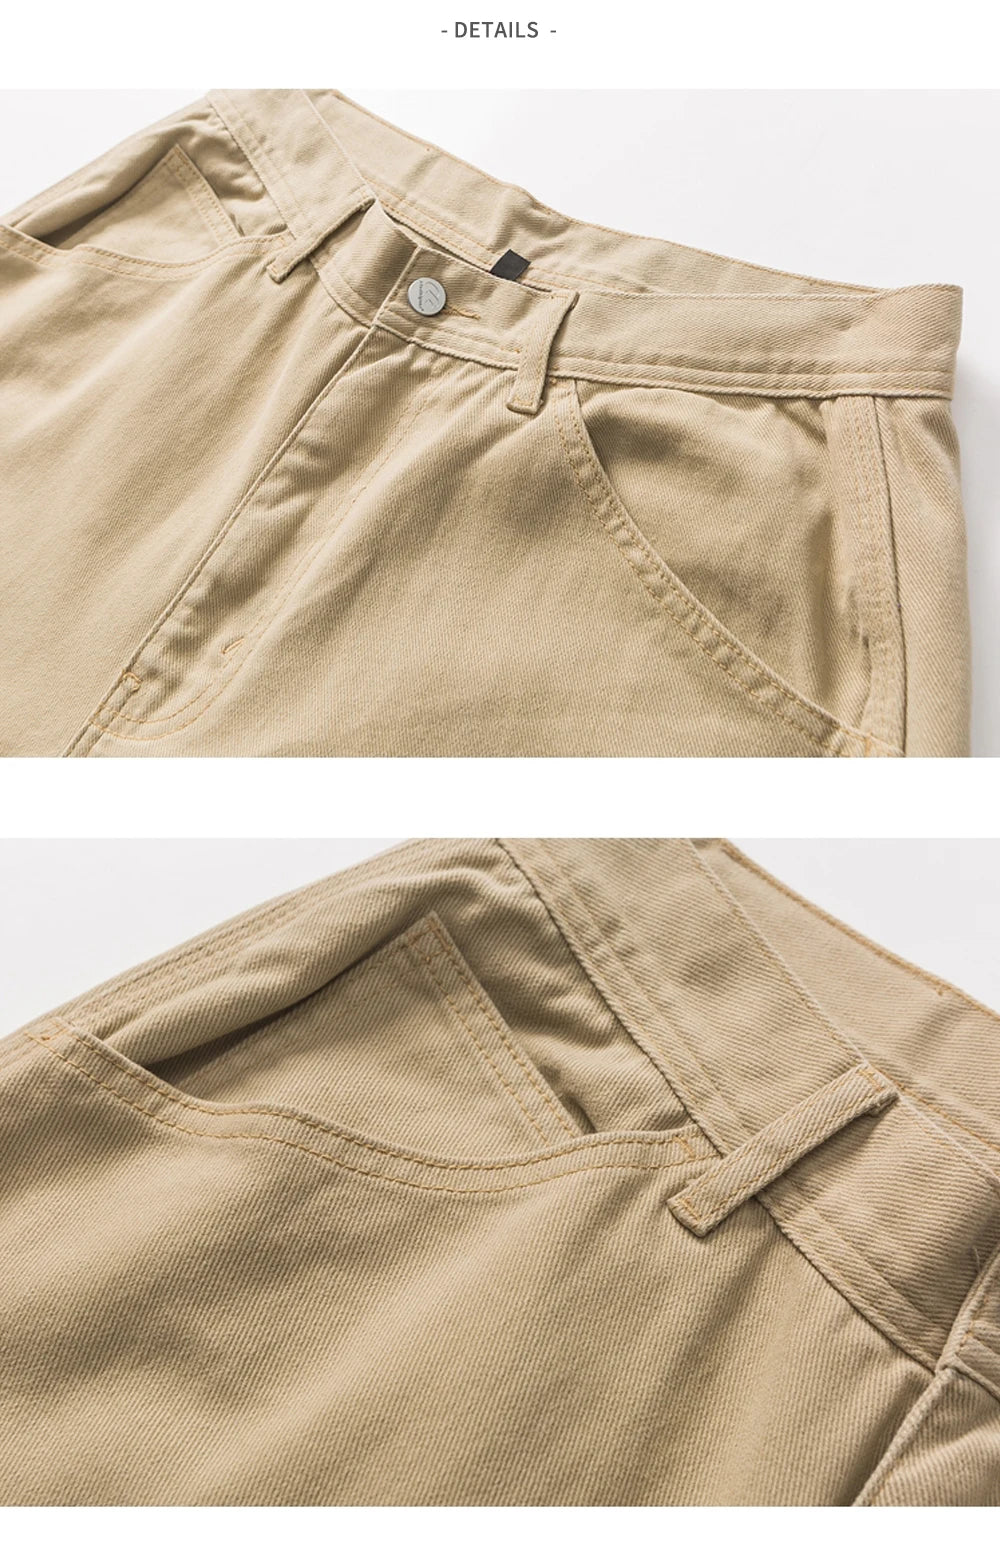 Medaigual Old School Straight Solid Classic Cargo Pants